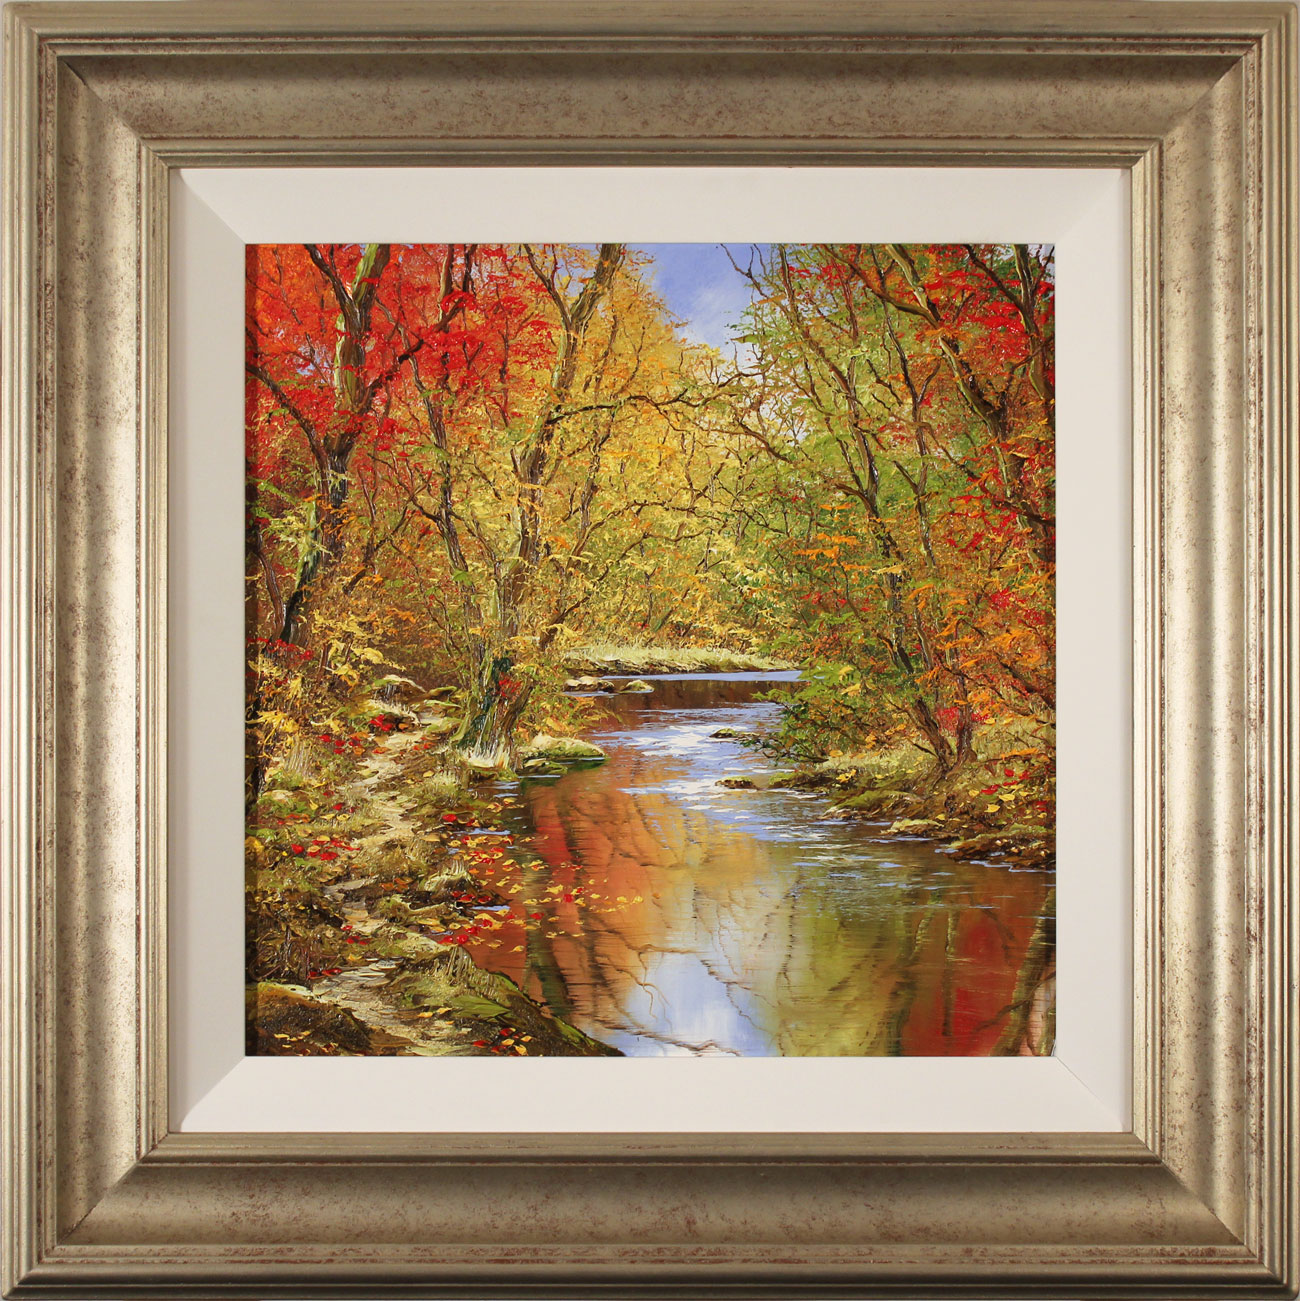 Terry Evans, Original oil painting on canvas, Autumn Trail